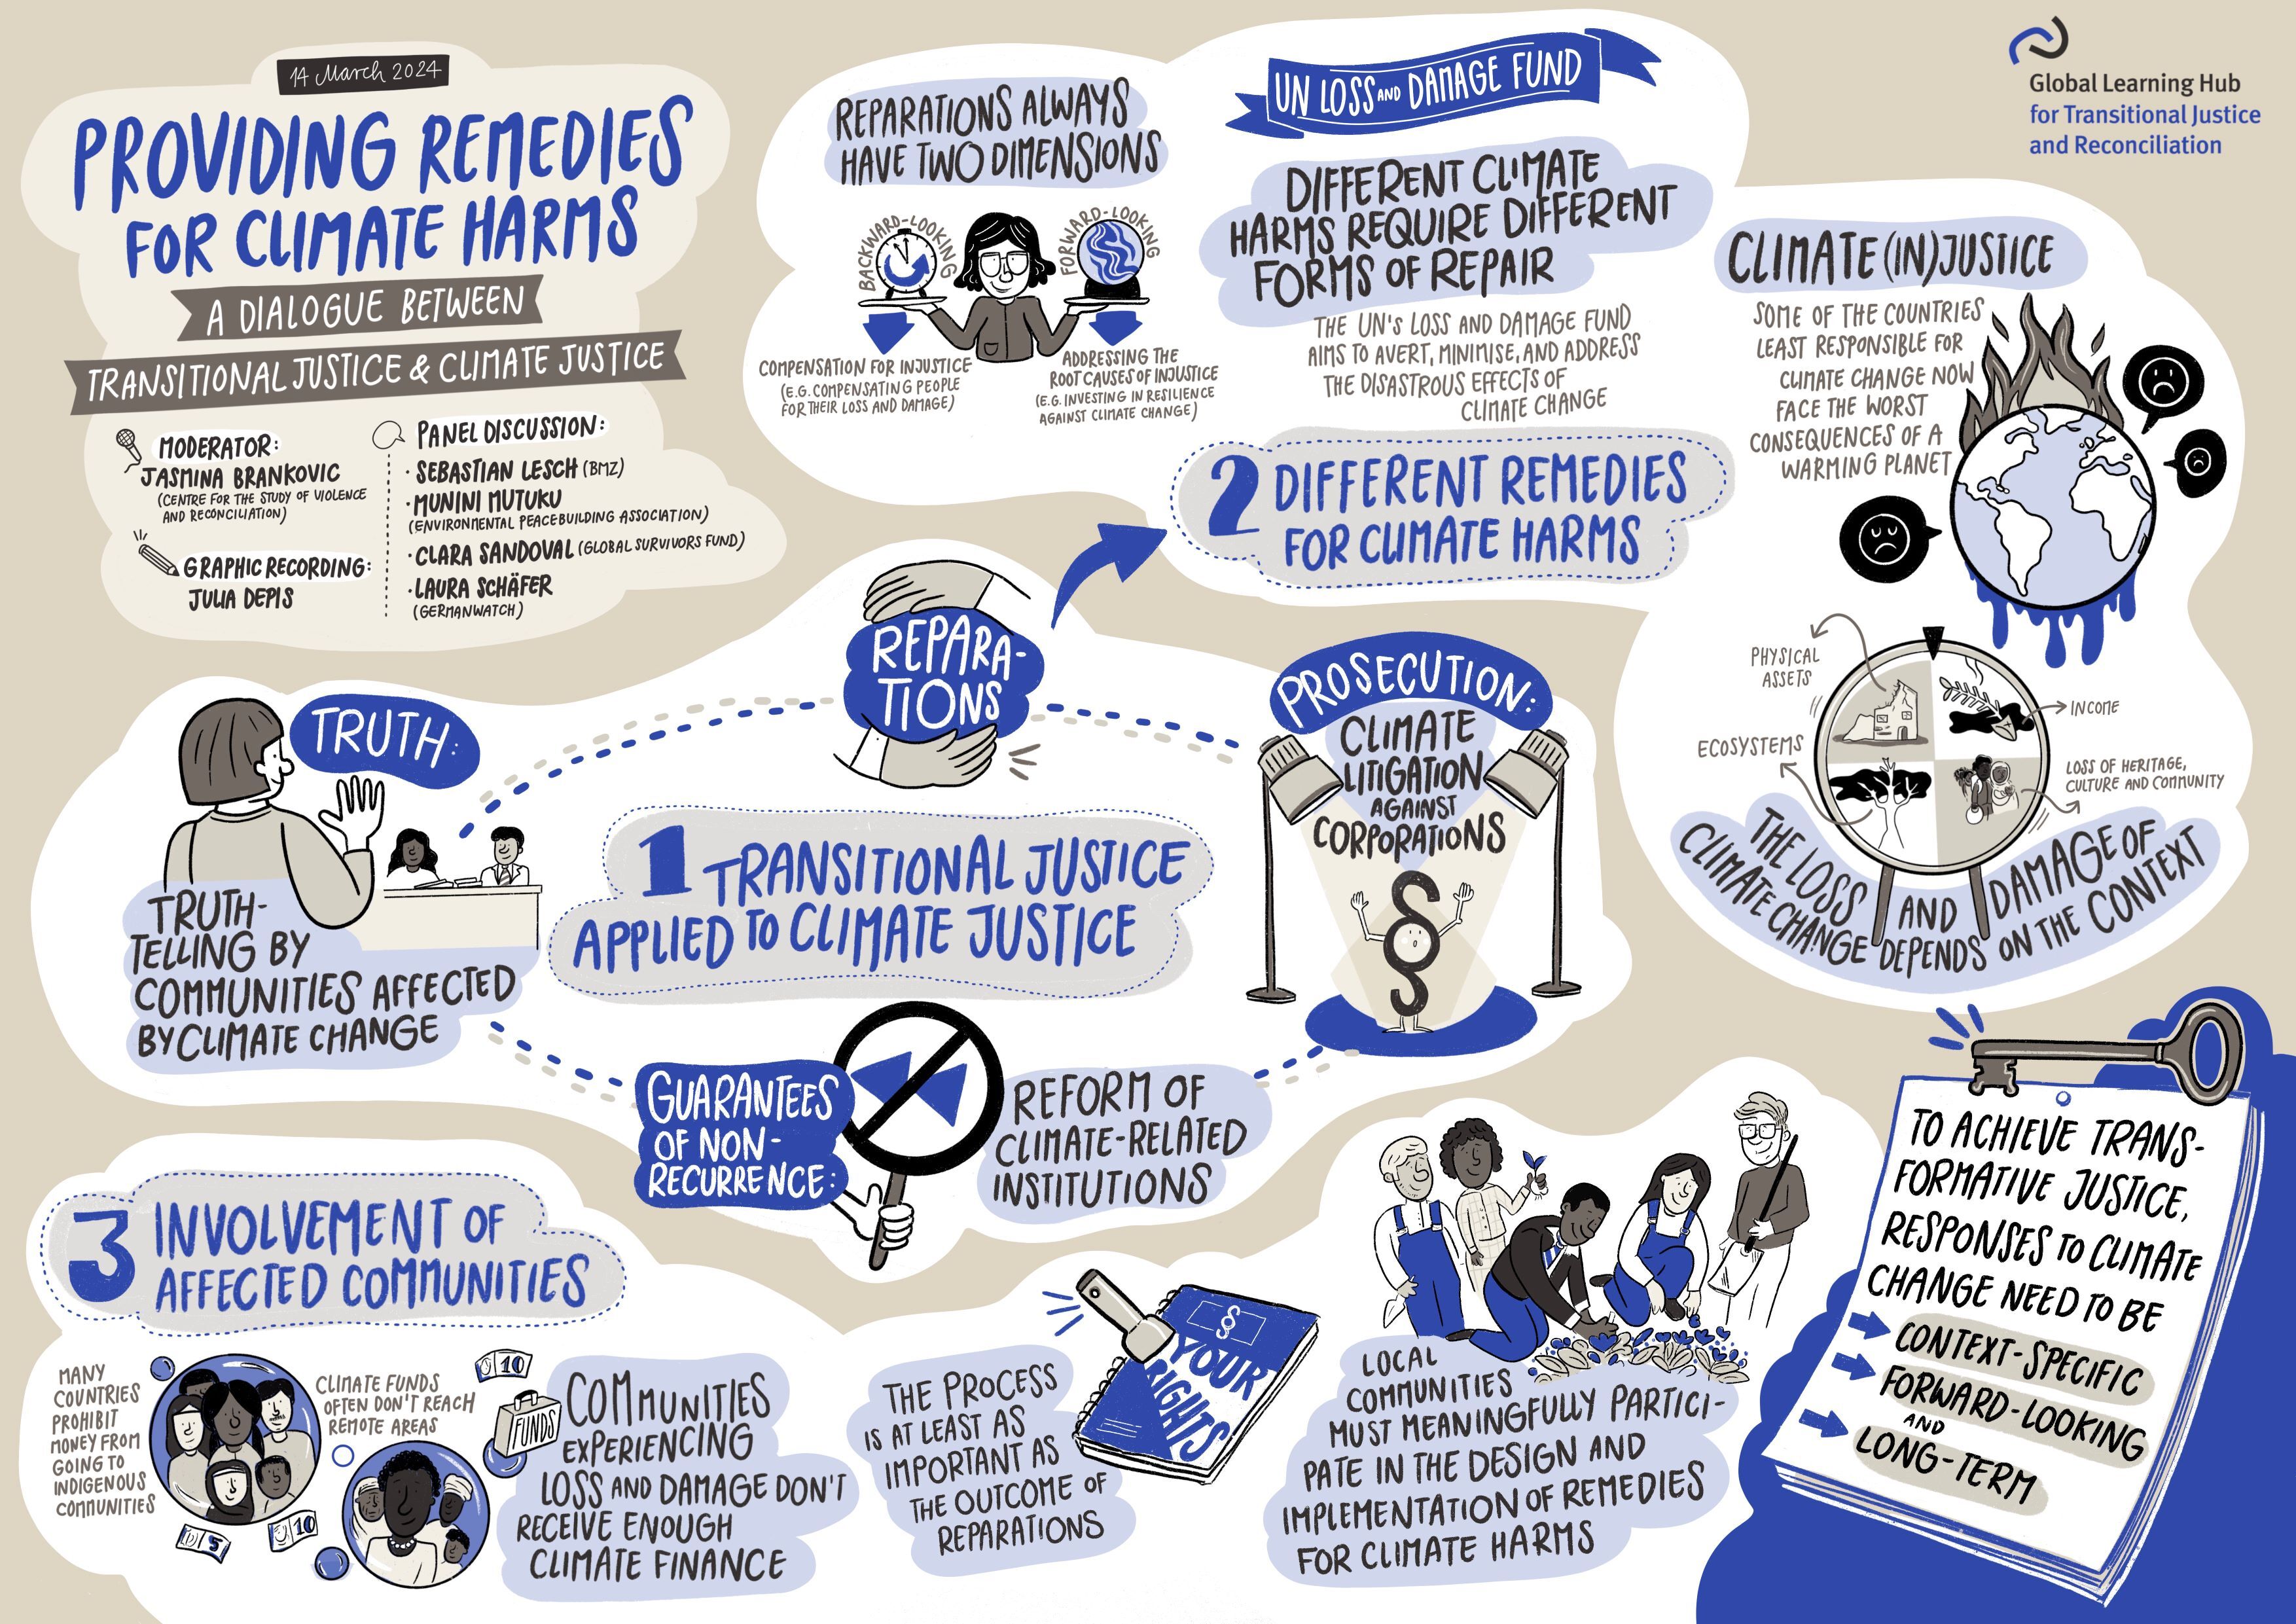 A GRAPHIC RECORDING SUMMARISING THE MAIN ARGUMENTS (DOWNLOAD AVAILABLE BELOW)